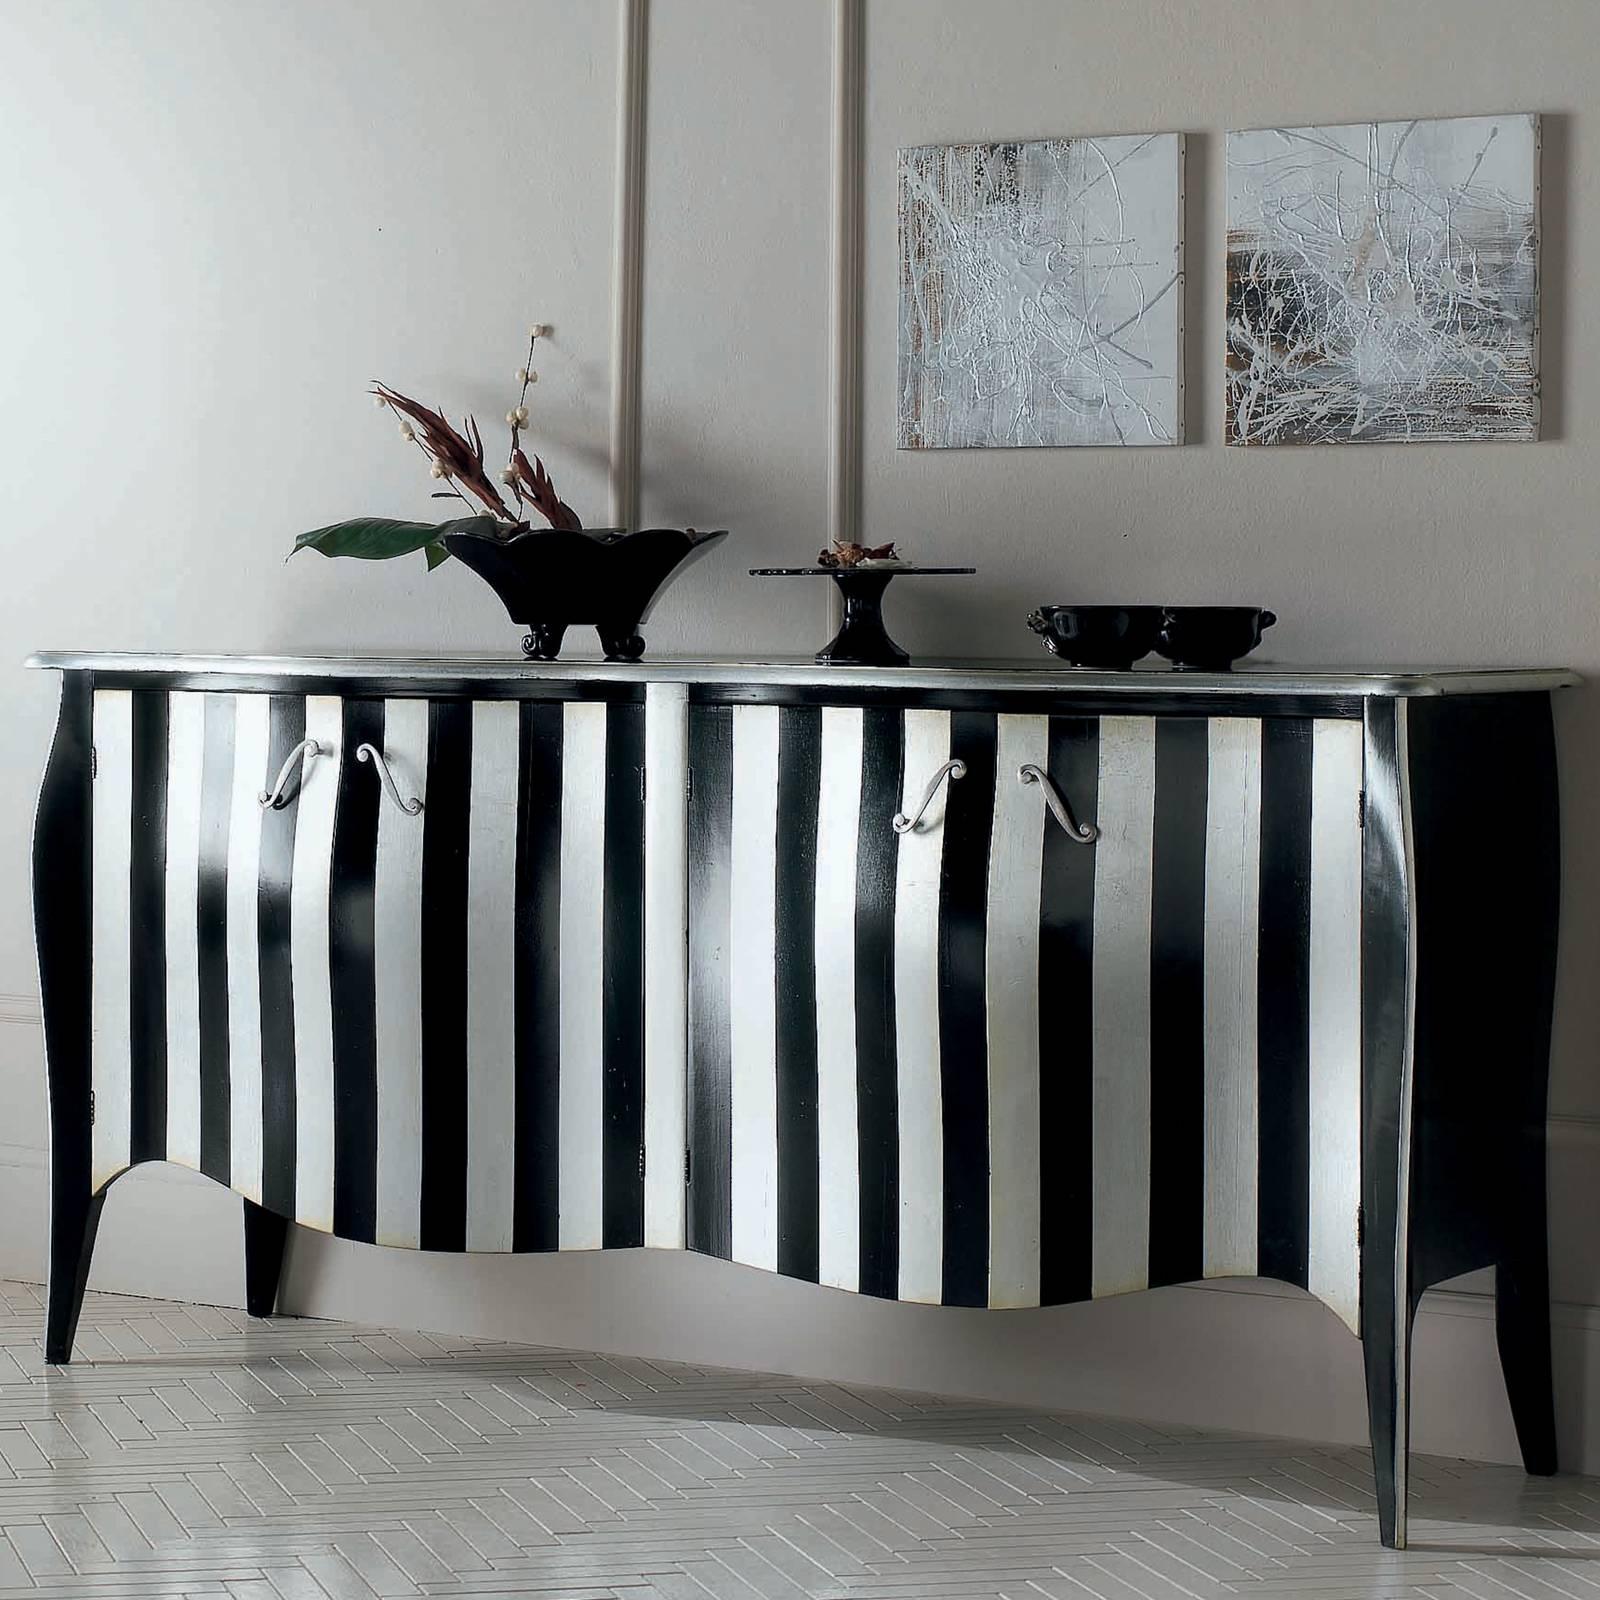 This elegant sideboard with four doors boasts a bold silhouette and sharp lines. The three-dimensional facade, complete with sinuous surface and scalloped lower edge, is accented by the striped black and white lines, effortlessly flowing into one